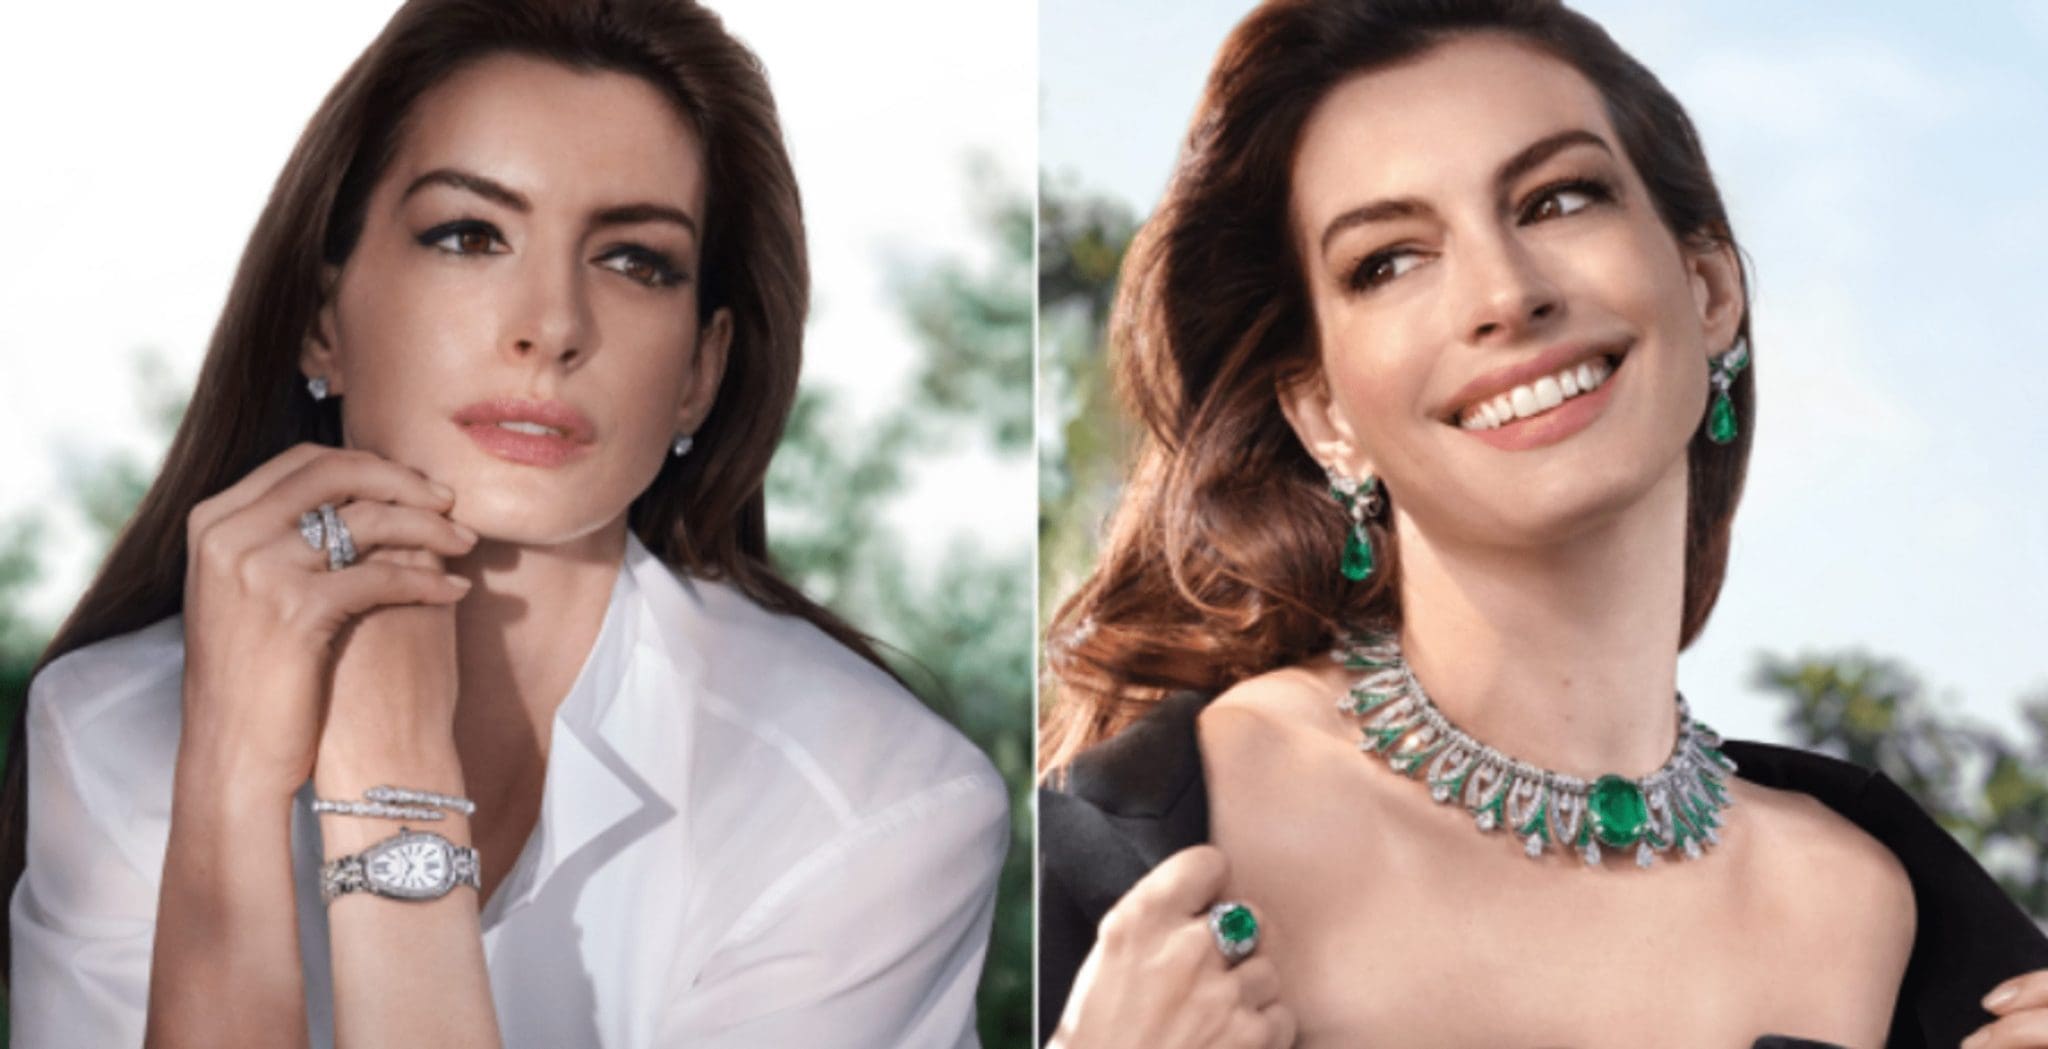 Bulgari appoints Anne Hathaway as its new ambassador